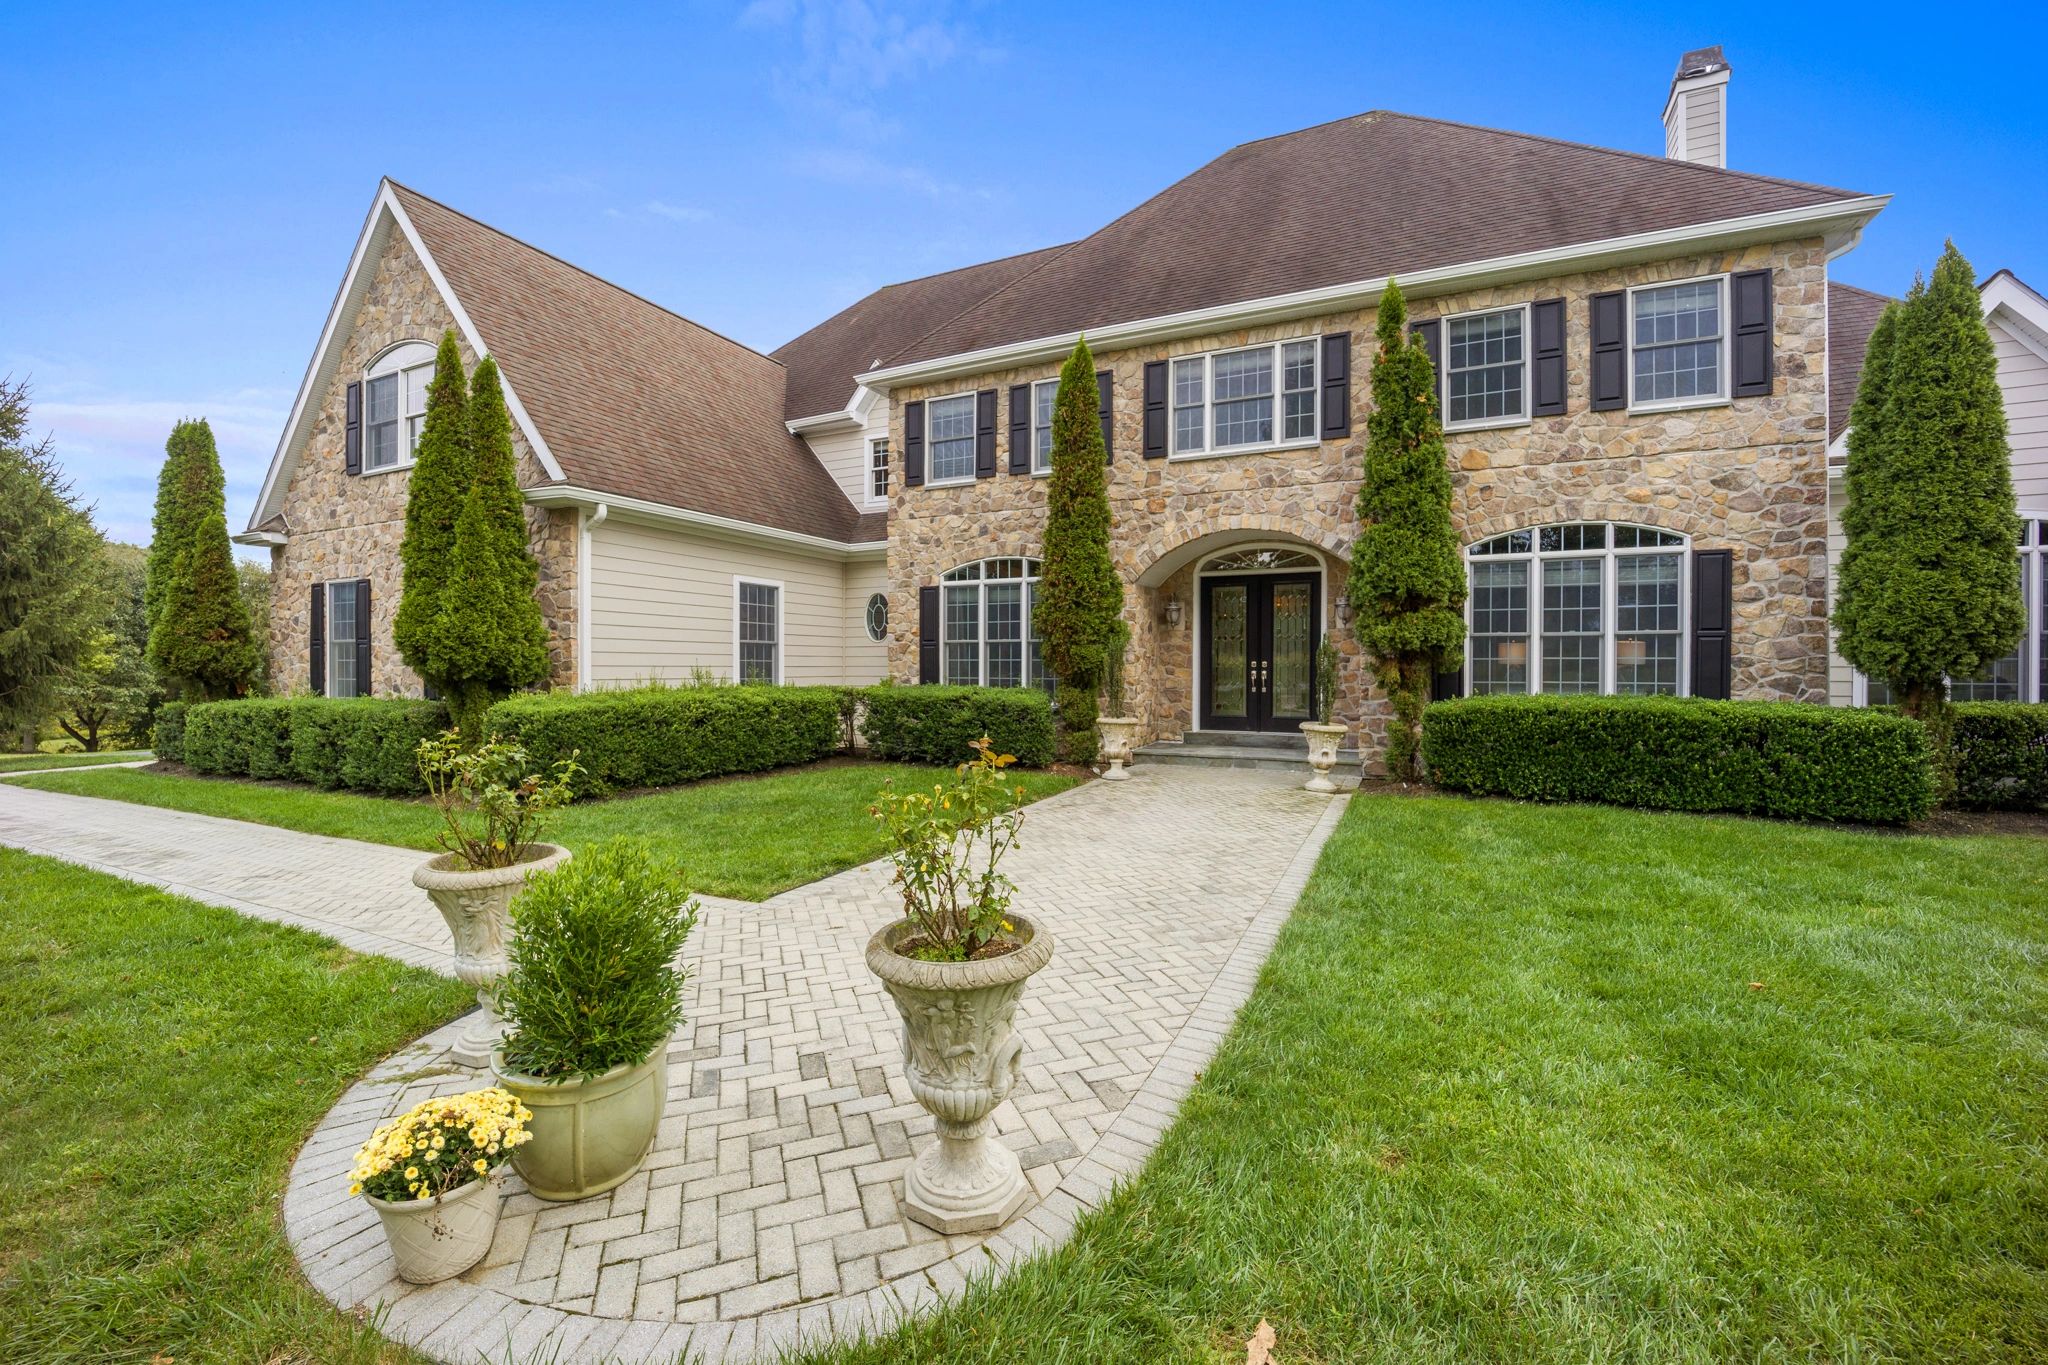 200 Sandy Flash Dr, Kennett Square, Pa Luxury Homes For Sale Chester County Sean Ryan Real Estate